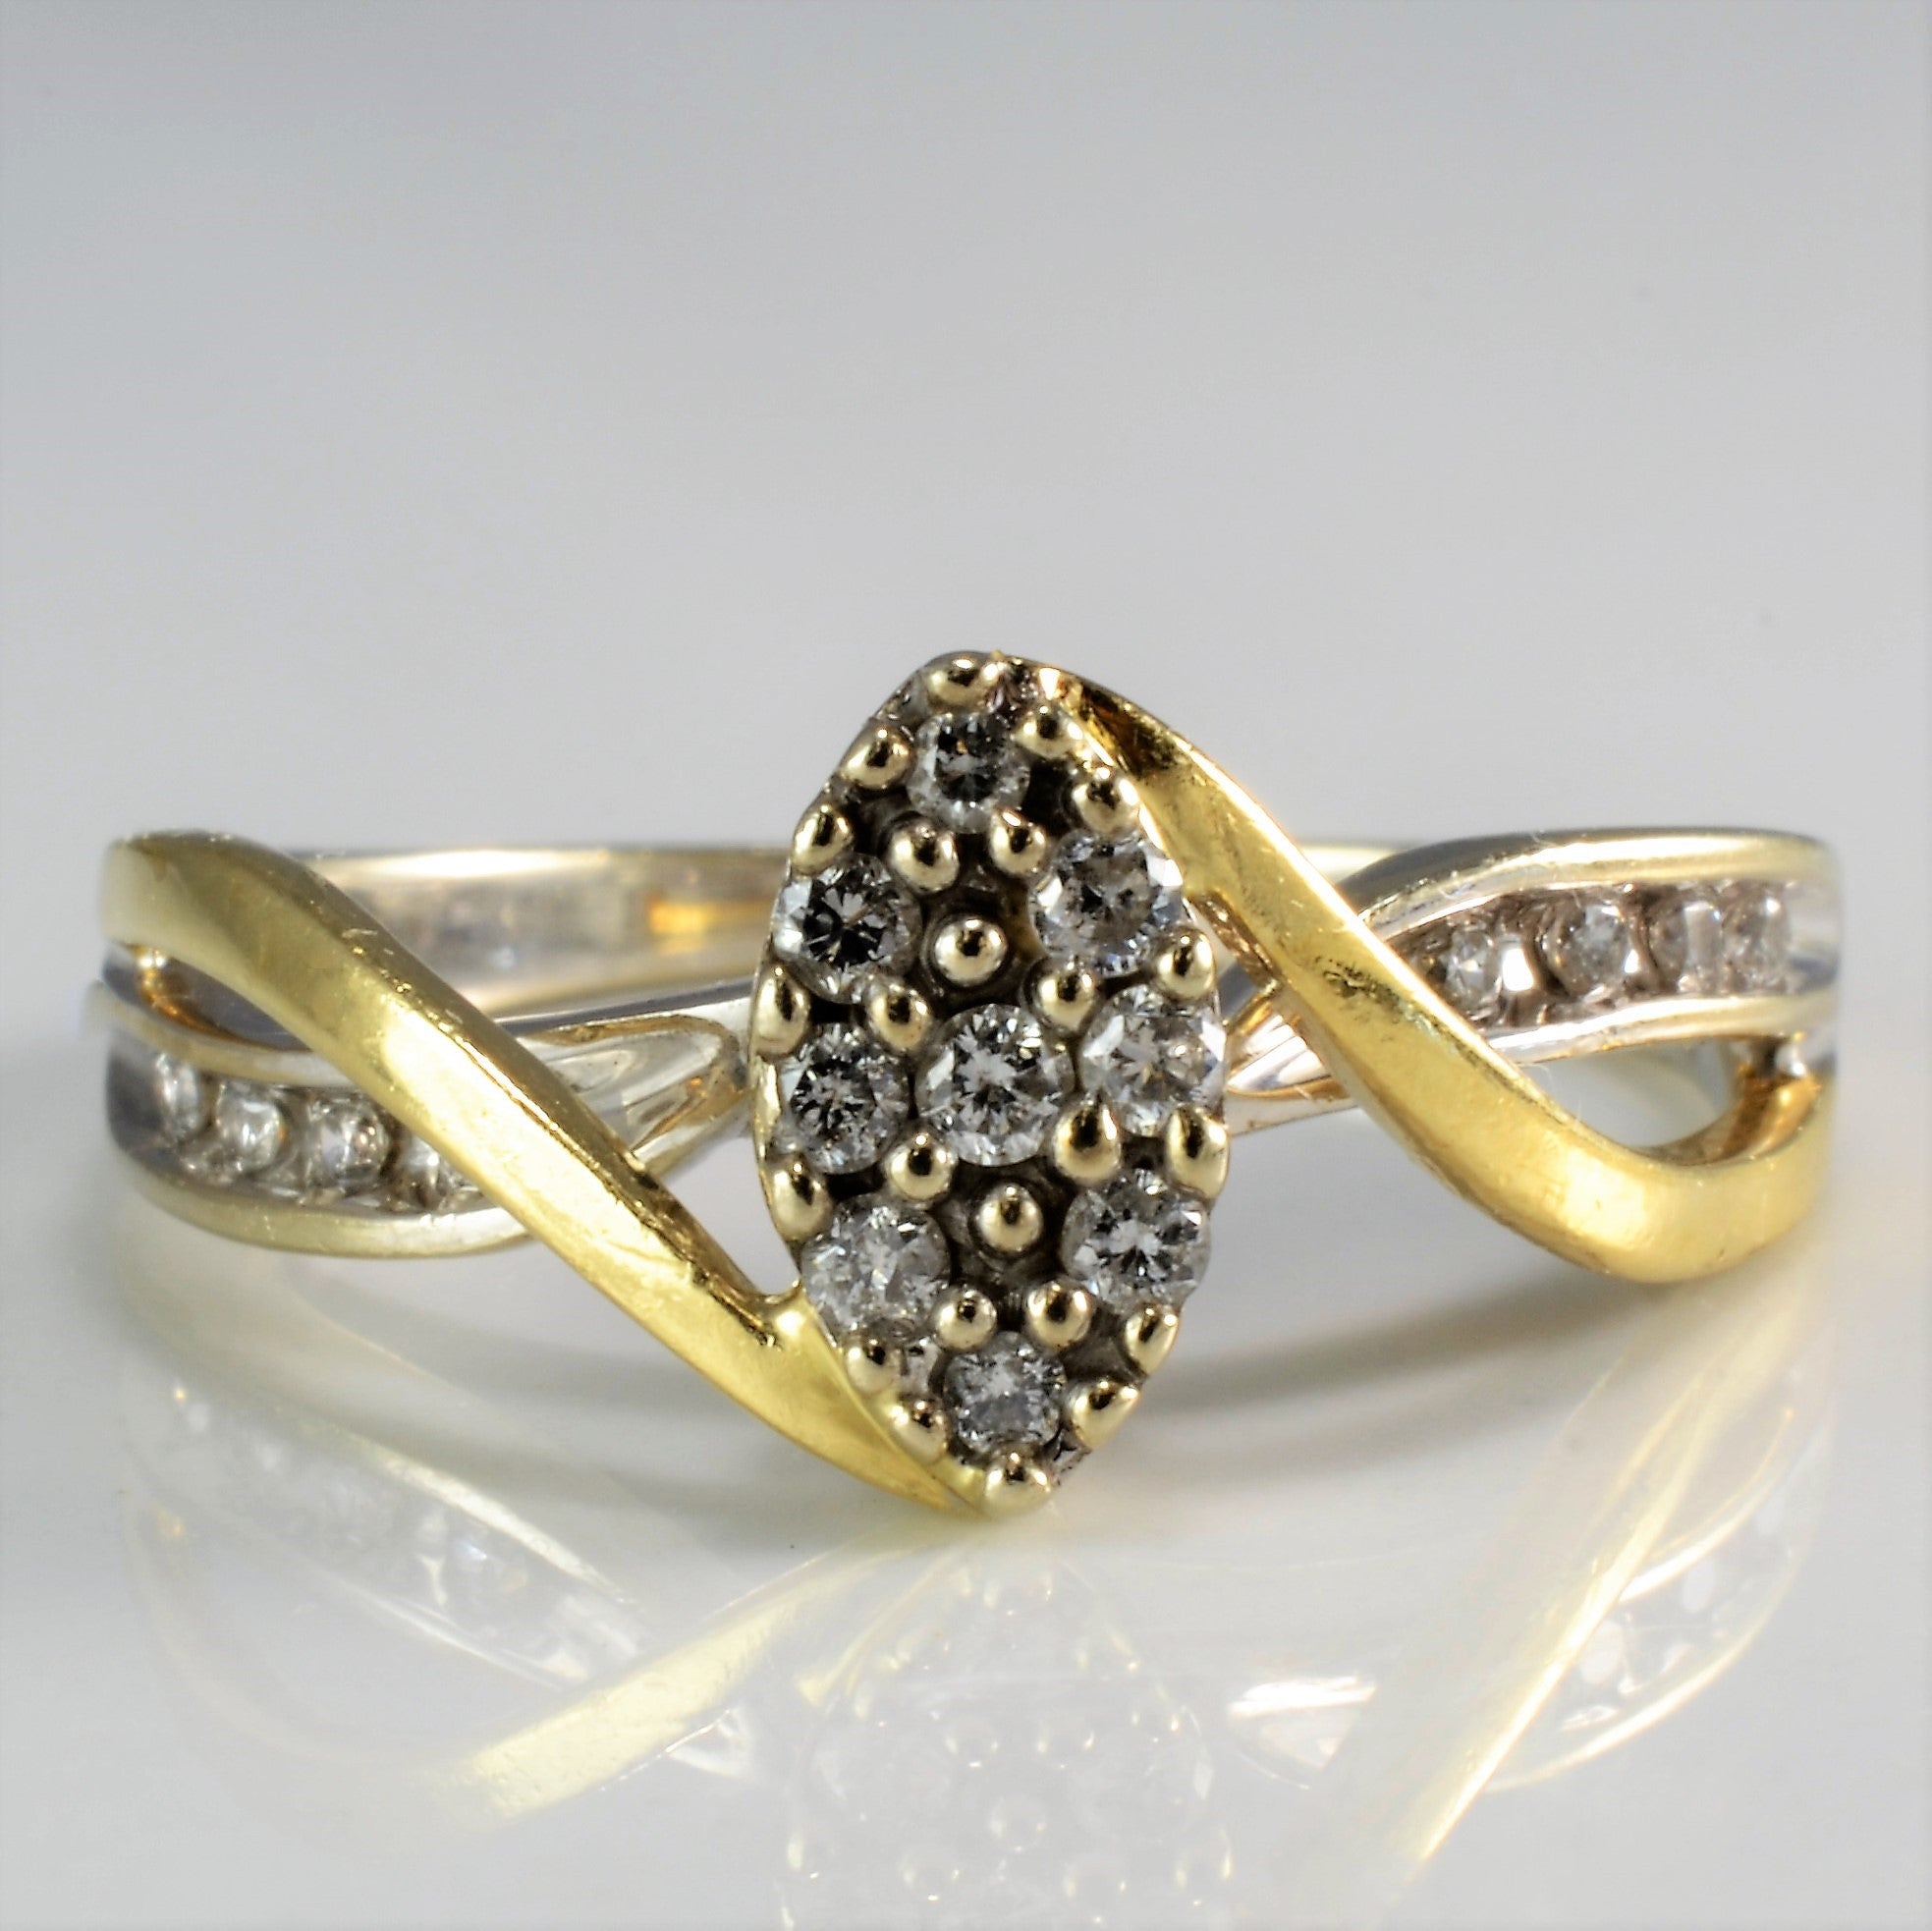 Two Tone Bypass Marquise Cluster Diamond Ring | 0.17 ctw, SZ 7 |